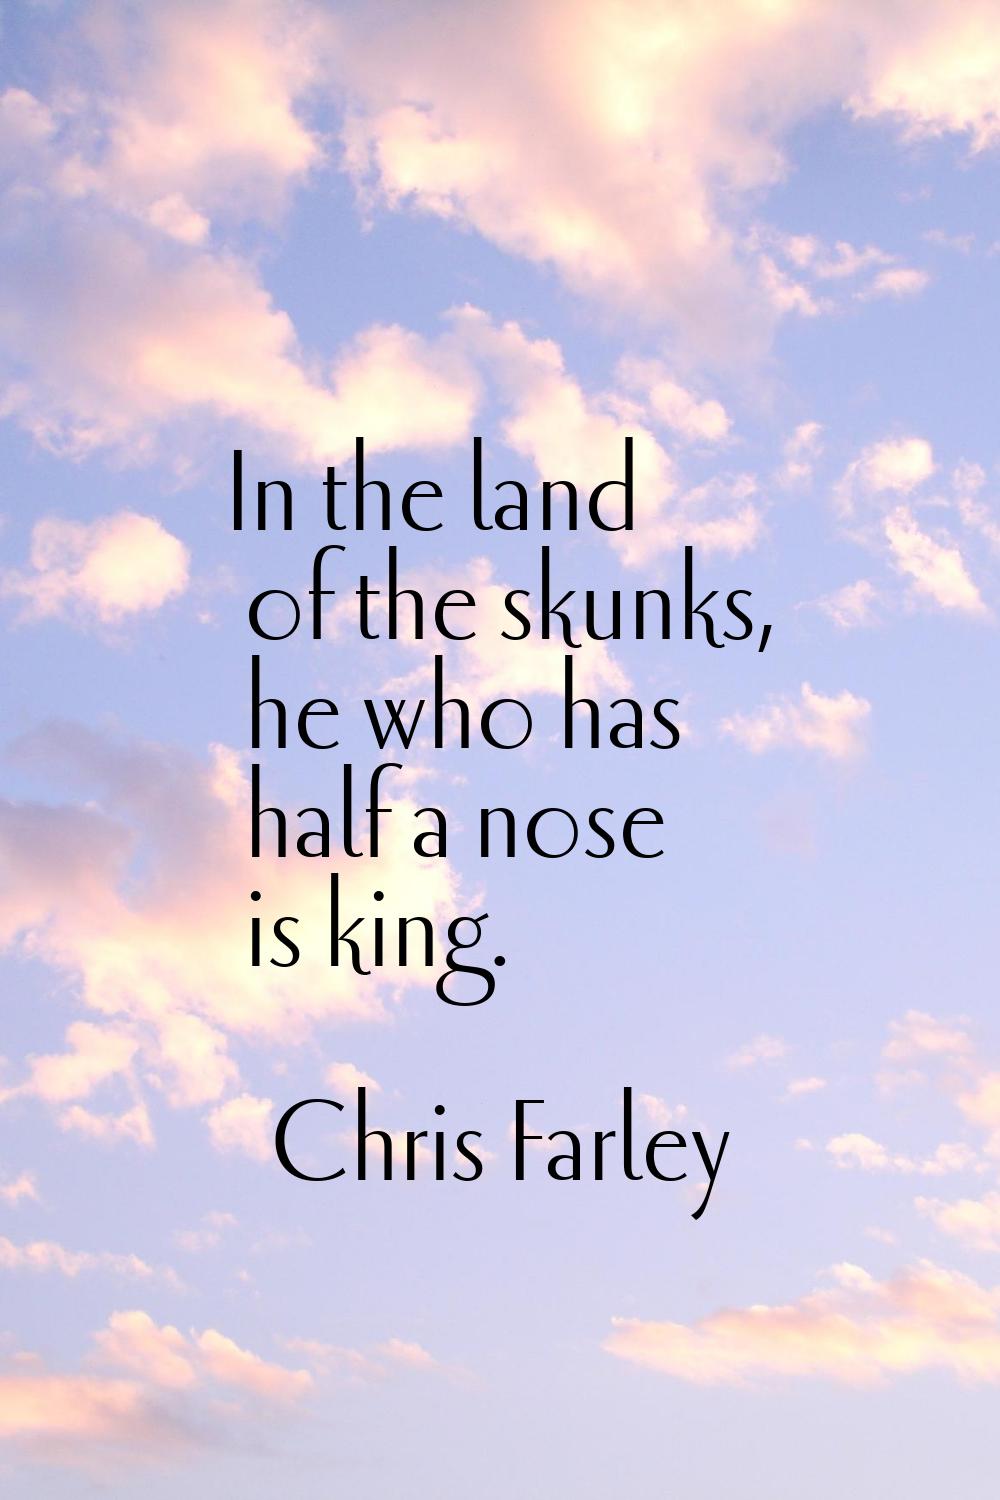 In the land of the skunks, he who has half a nose is king.